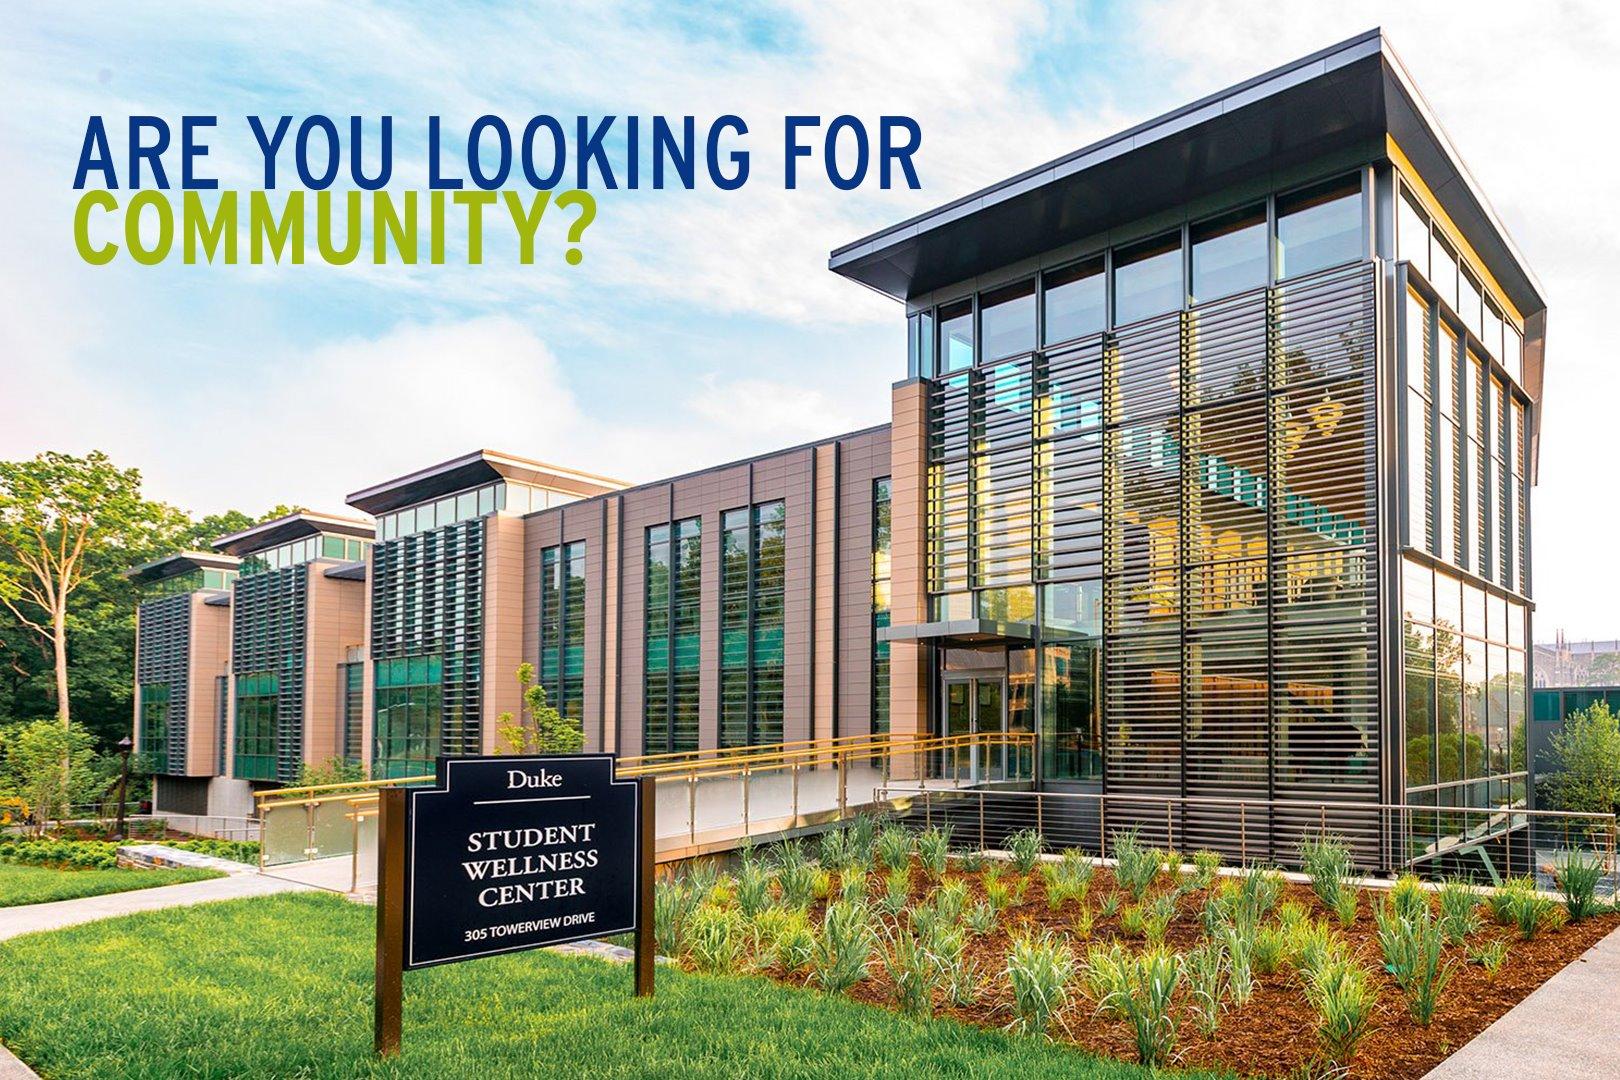 Are you looking for community? (left corner) Background is the student wellness center building surrounded by plants, grass, and the sidewalk.